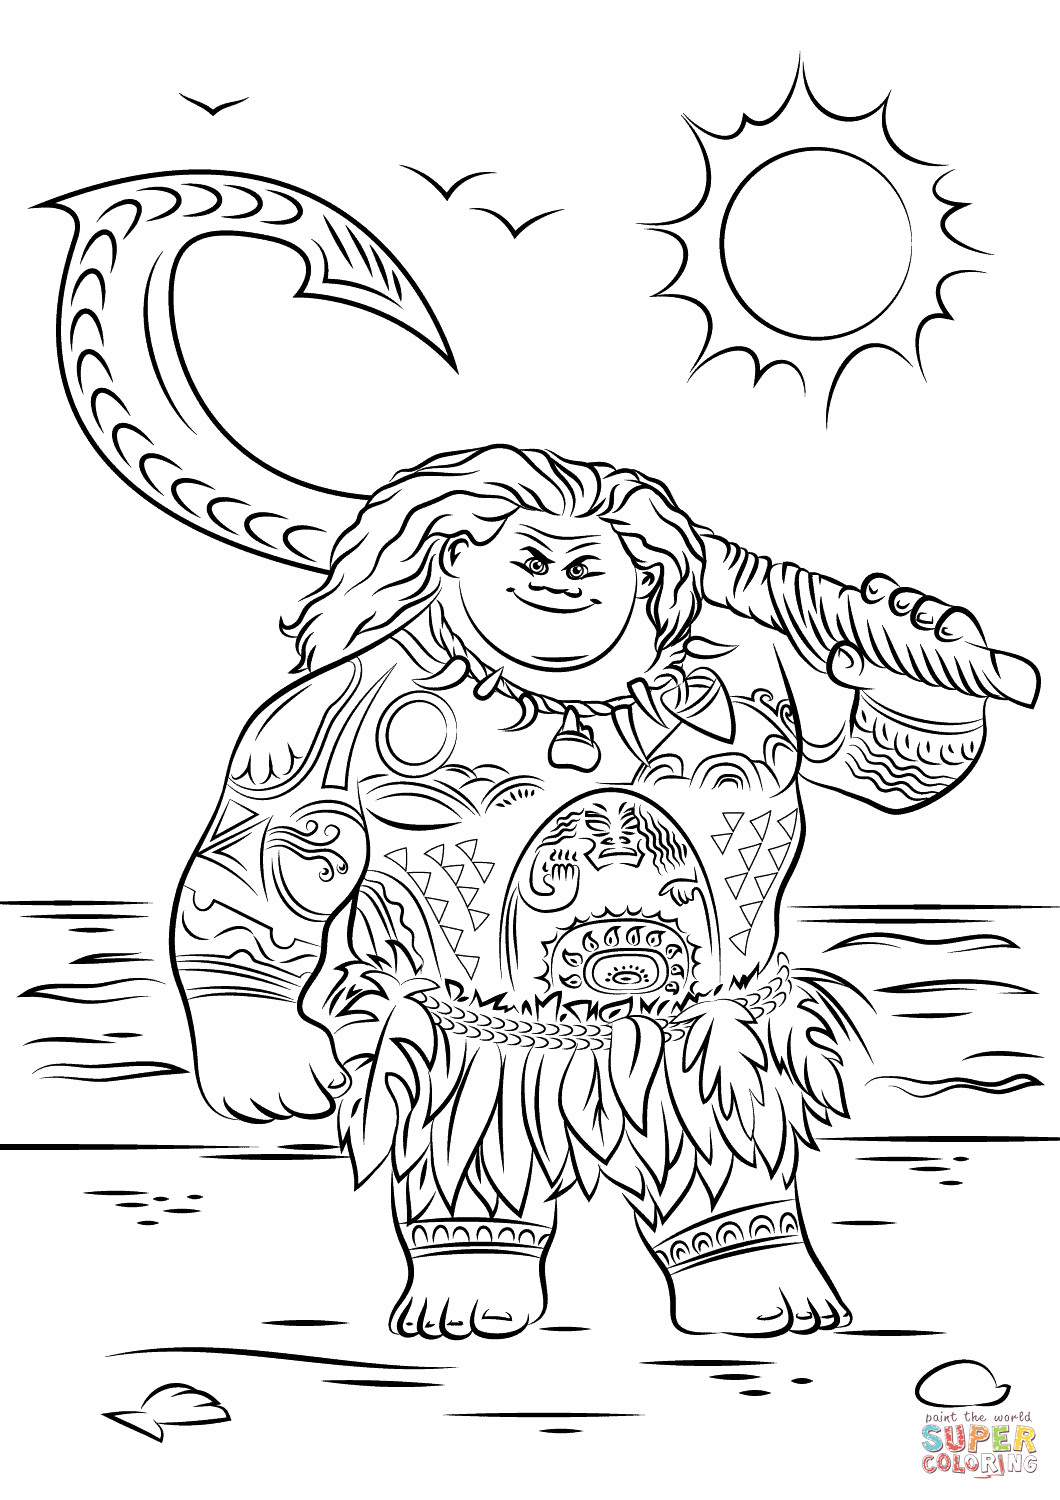 Kids Coloring Pages Moana
 Maui from Moana coloring page